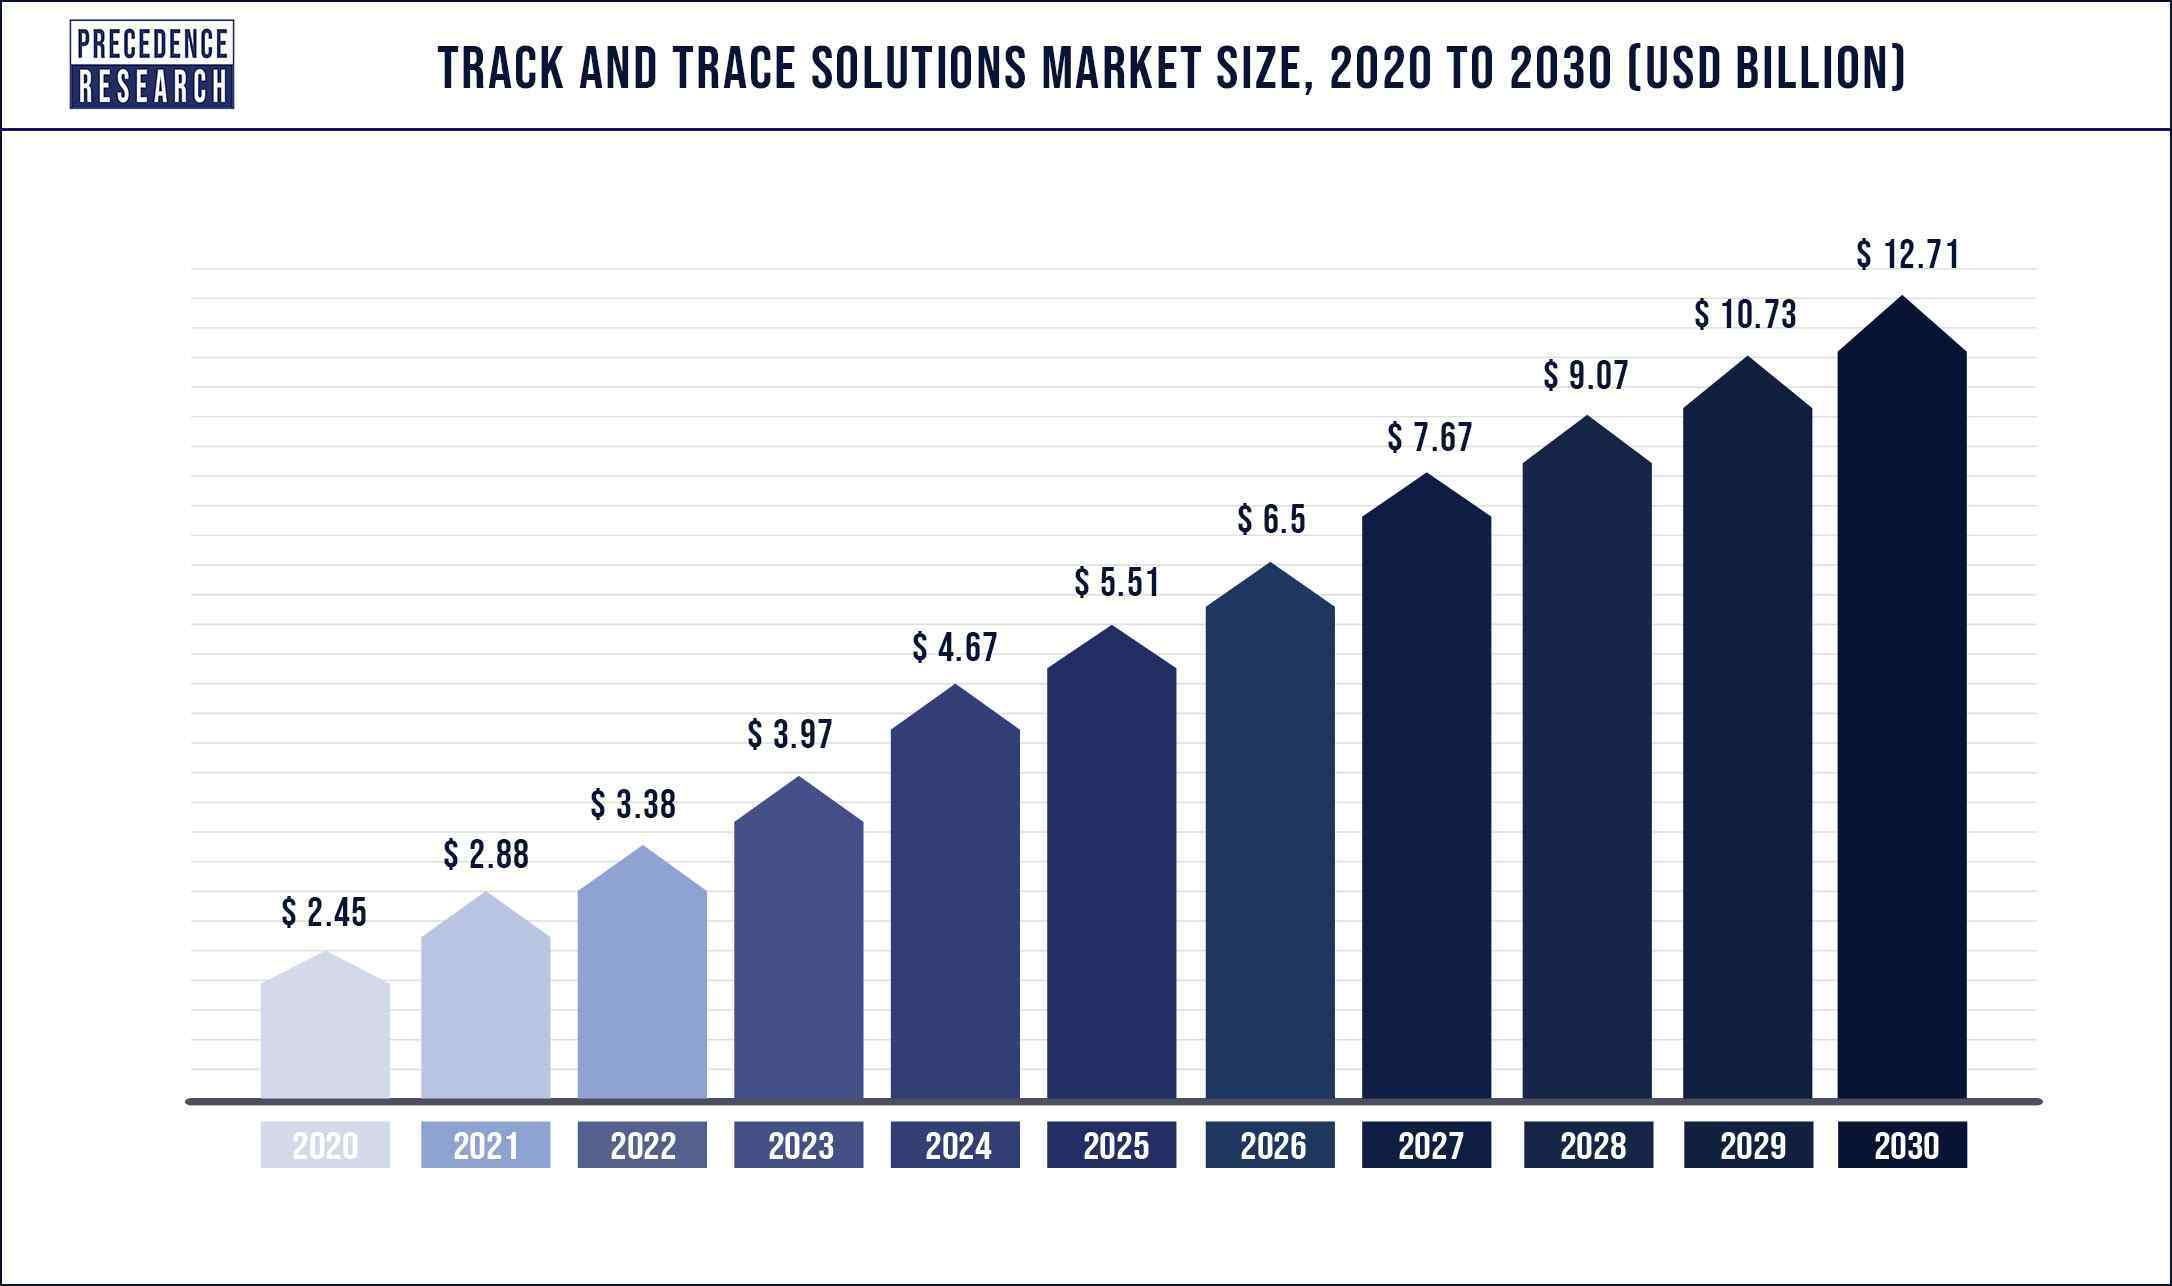 Track and Trace Solutions Market Size 2021 to 2030